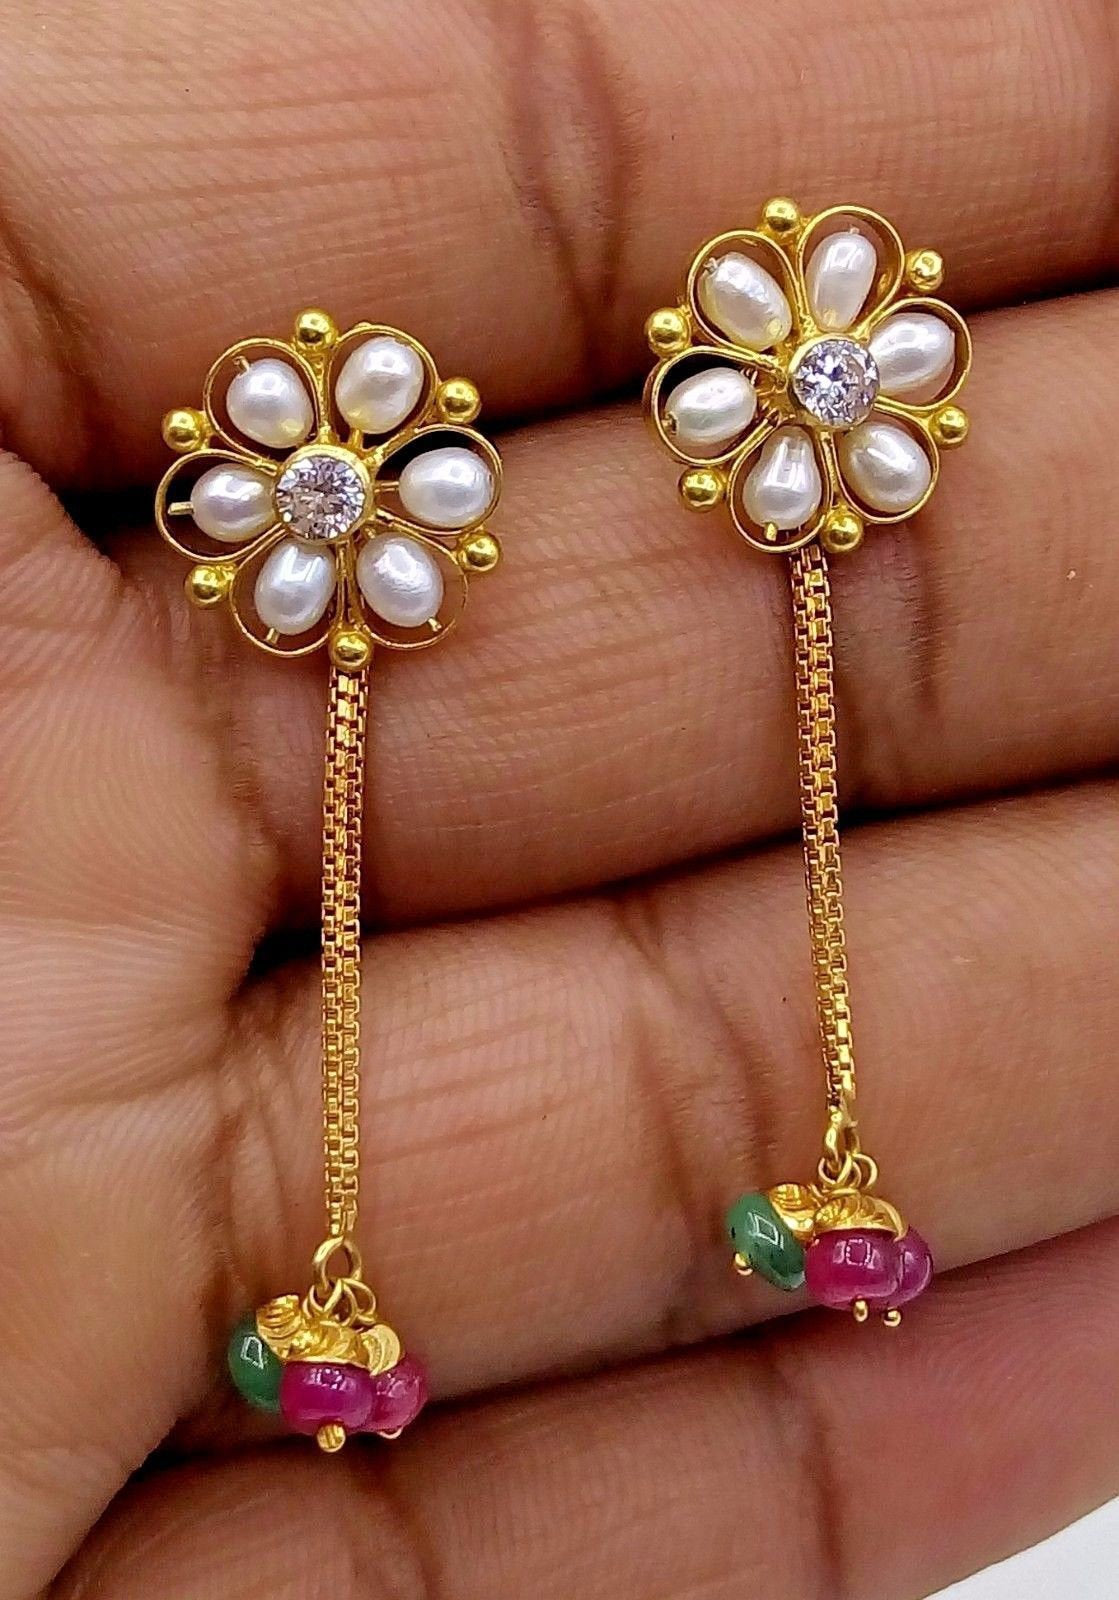 Certified 22kt yellow gold handmade fabulous earring dangling jewelry with gorgeous color beads and box chain antique style jewelry - TRIBAL ORNAMENTS